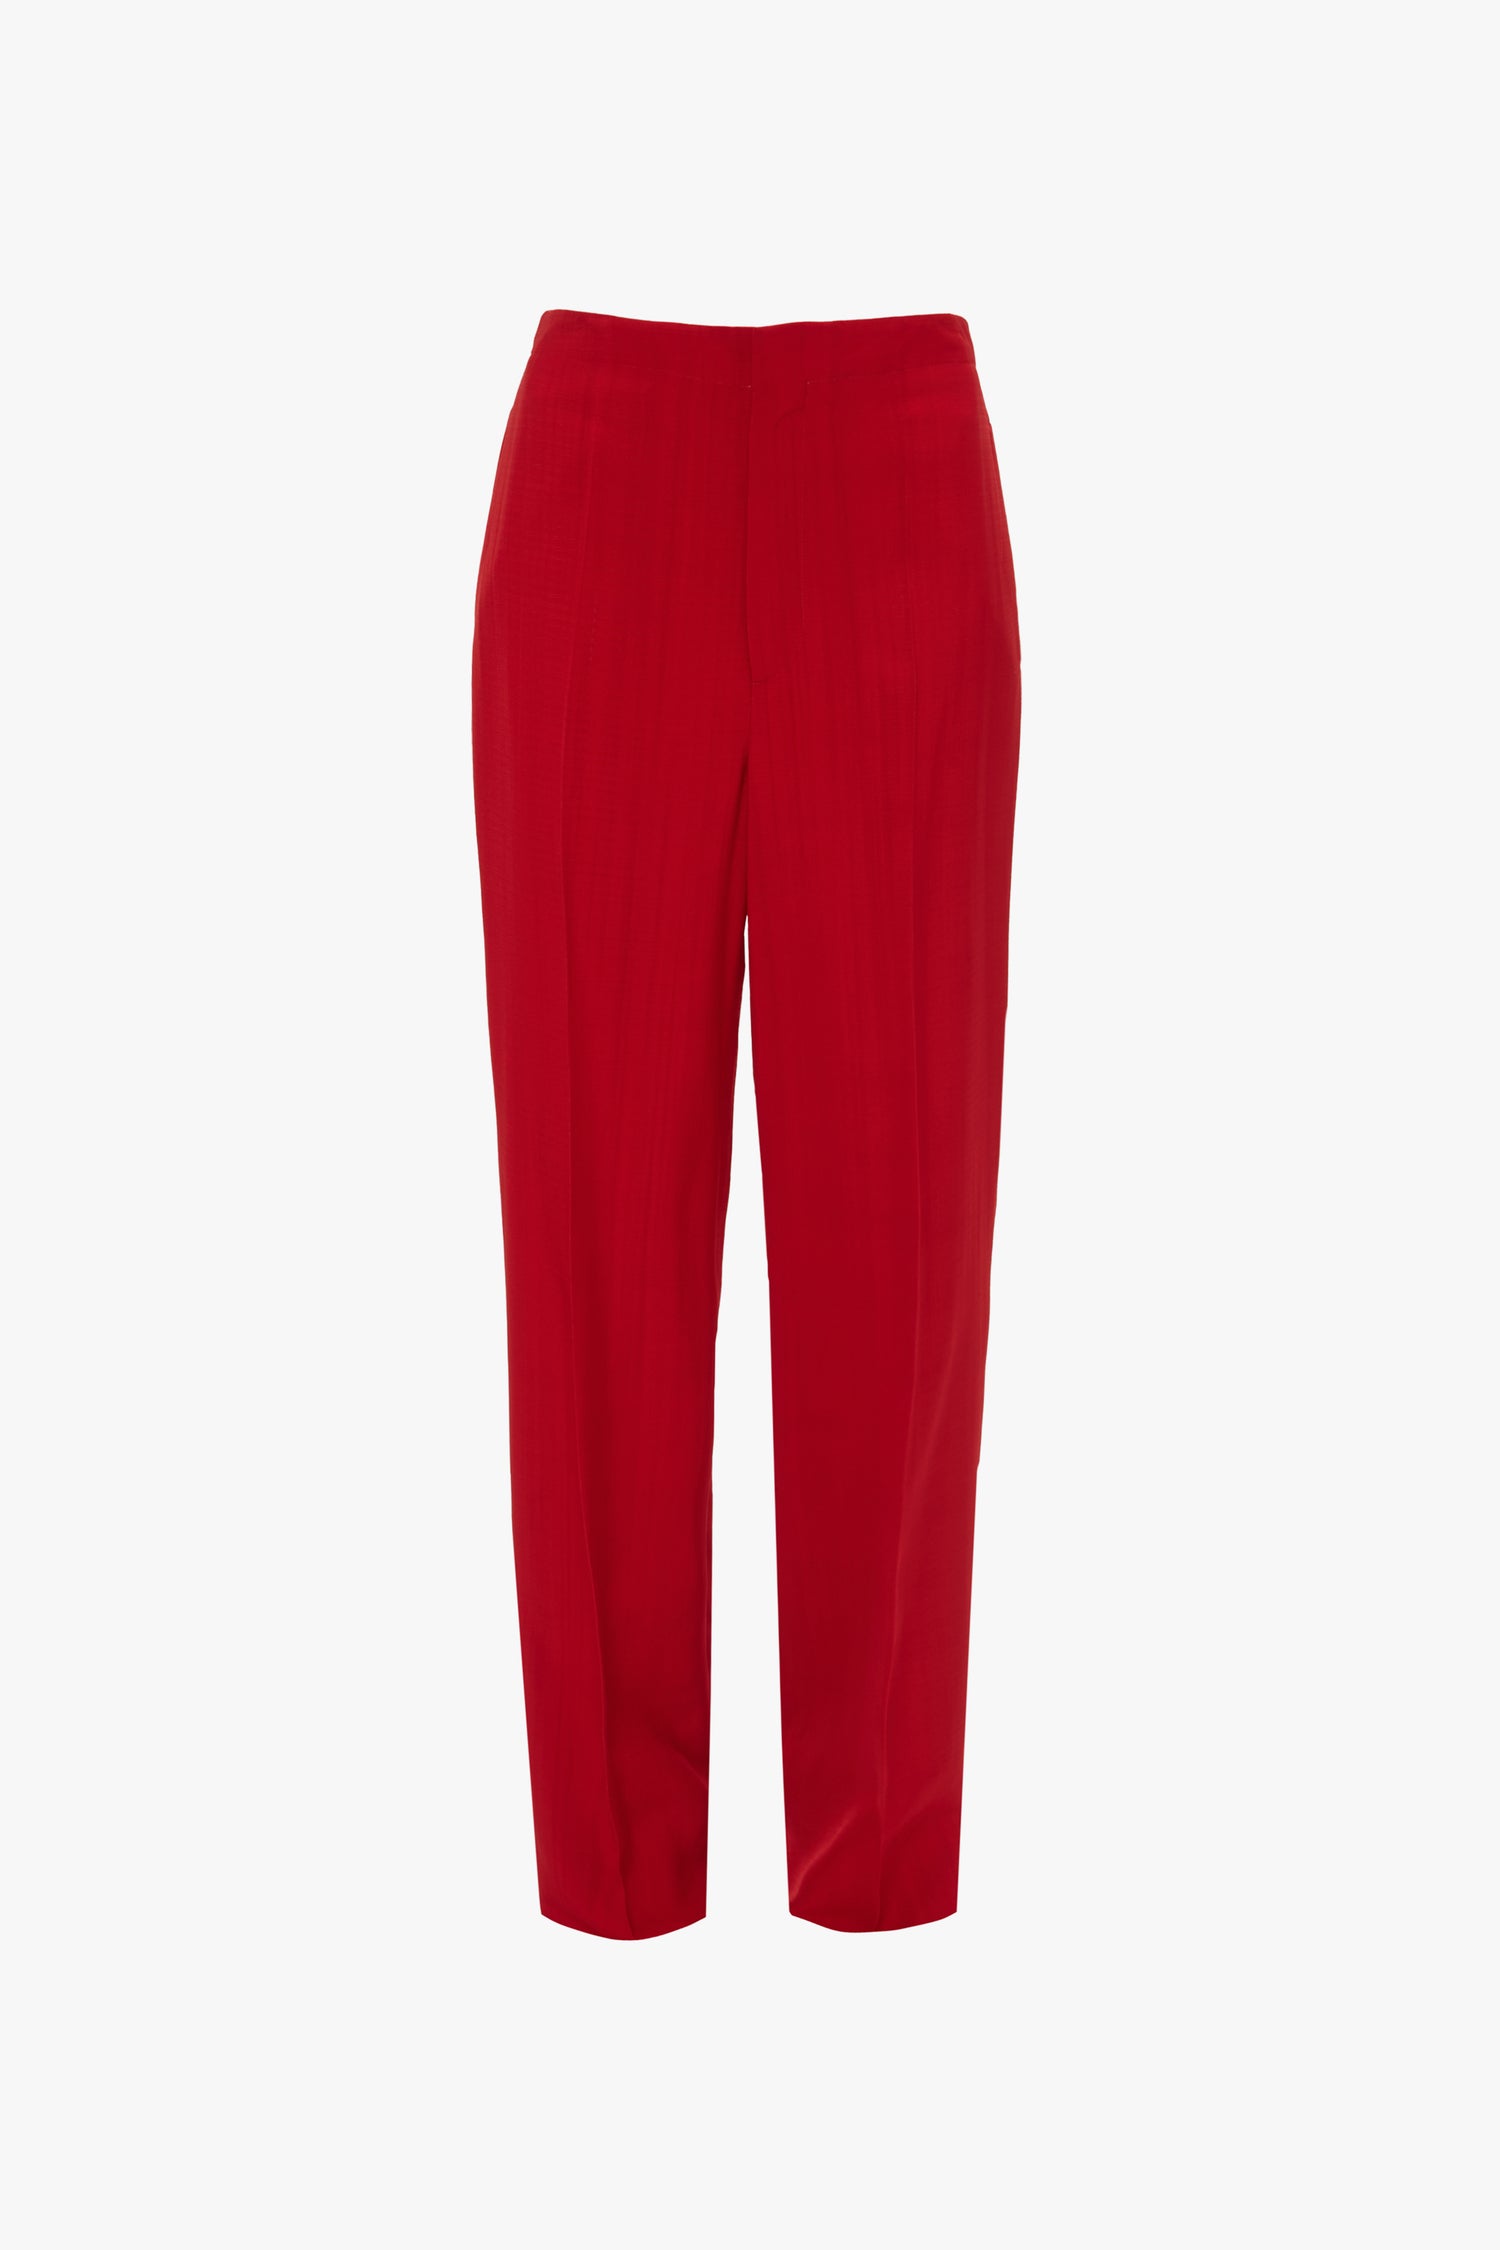 A pair of straight-leg, high-waisted Tapered Leg Trouser in Carmine from Victoria Beckham with a front seam detail, traditional tailoring elements, and a concealed waistband closure.